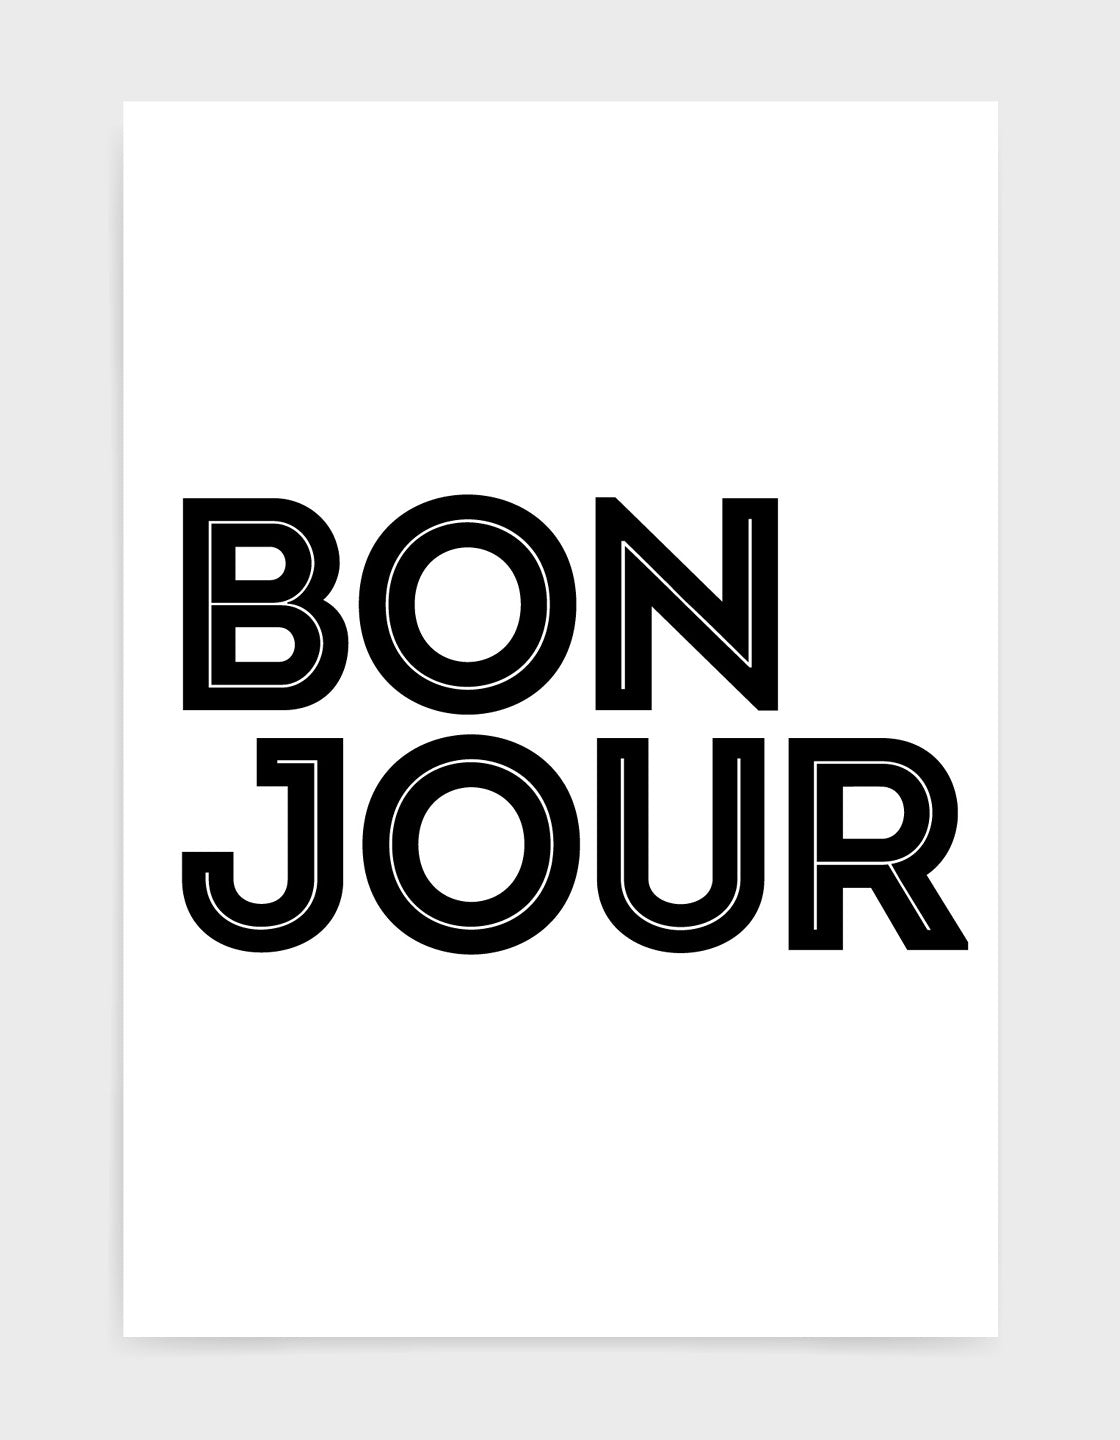 monochrome art print of the word Bonjour in black against a white background